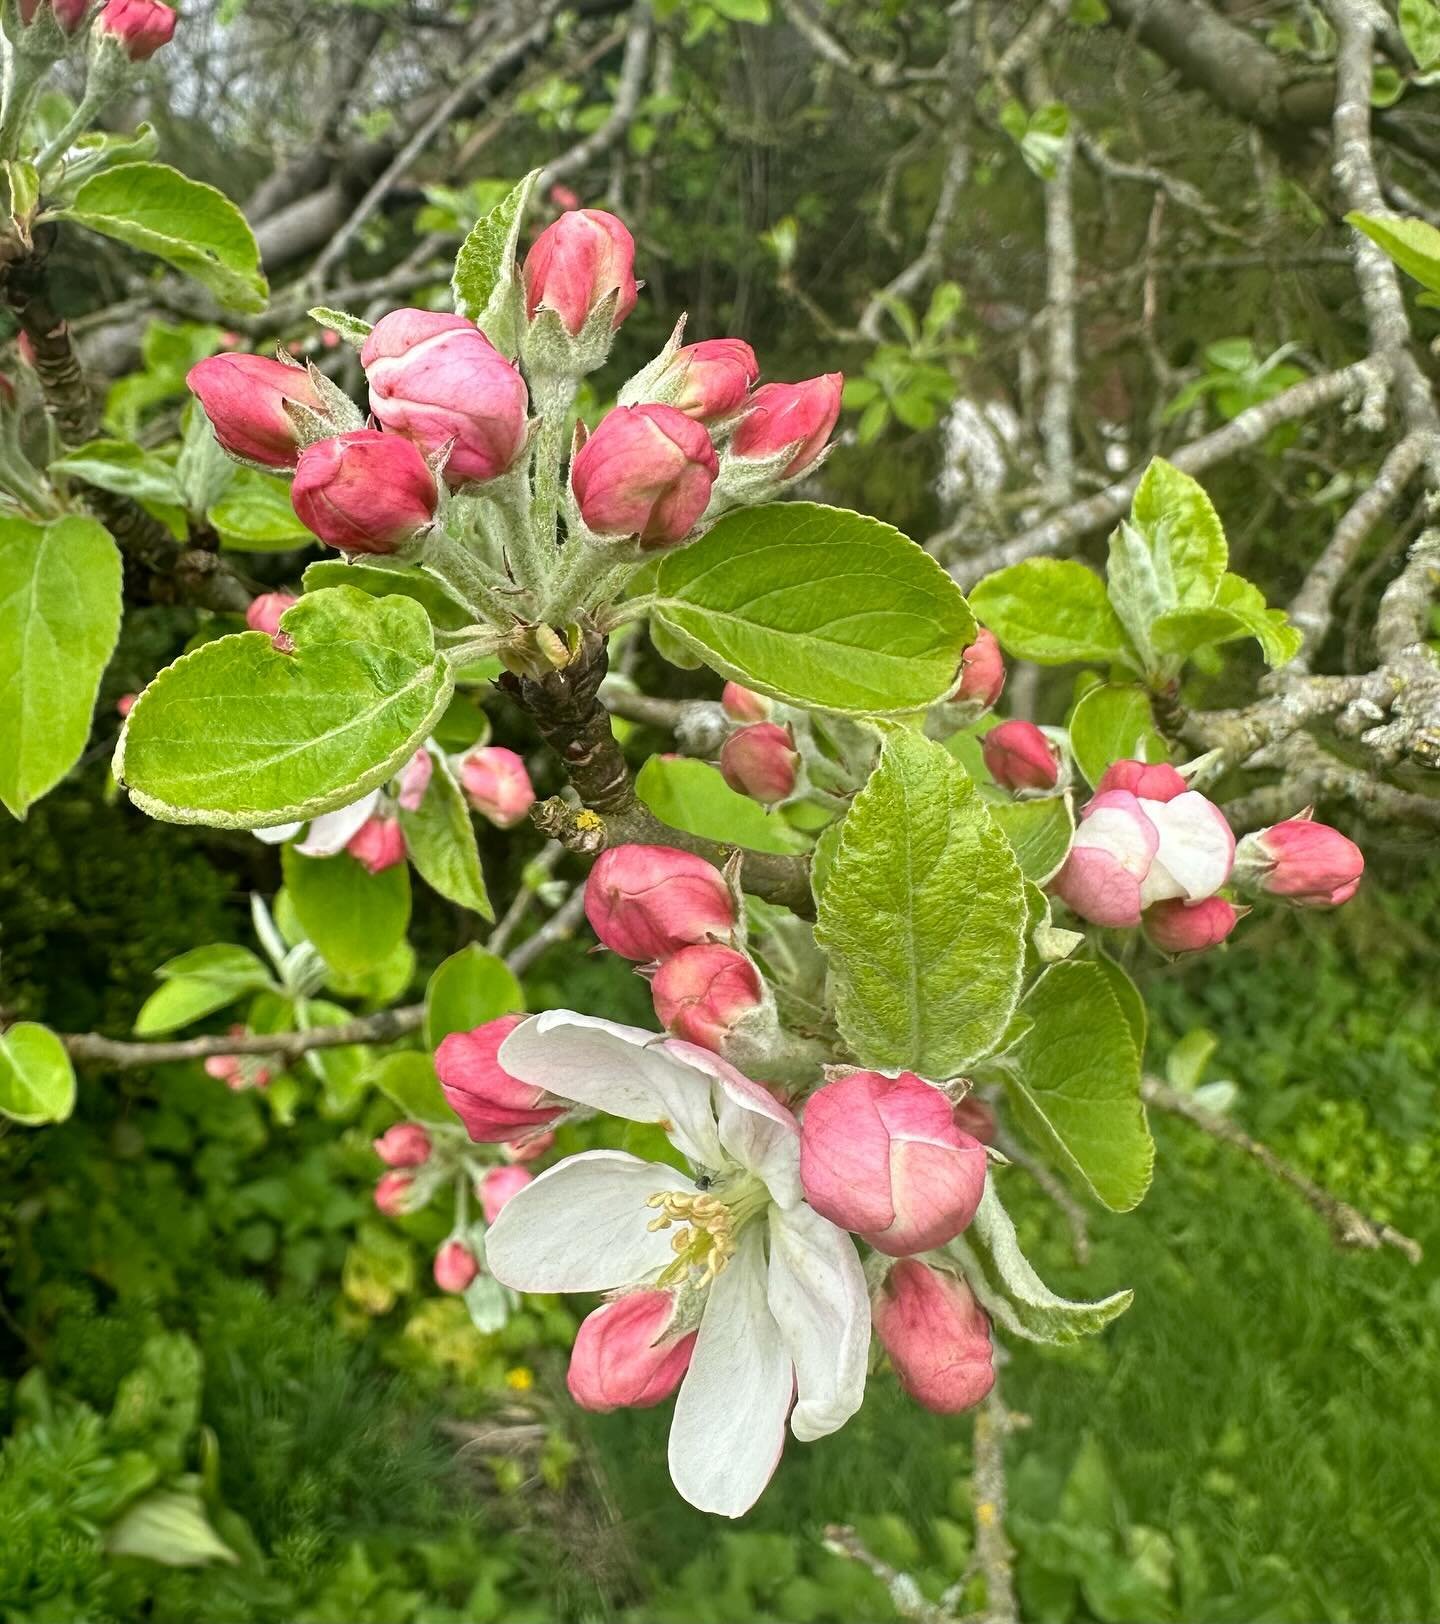 Chalkhill Rewildings April Newsletter is out. Follow the link in my bio to sign up to receive it plus a free copy of &ldquo;Five Easy Ways to Make your Garden Wilder&rdquo;. #newsletter #wildlifegardening #rewildyourgarden #appleblossom